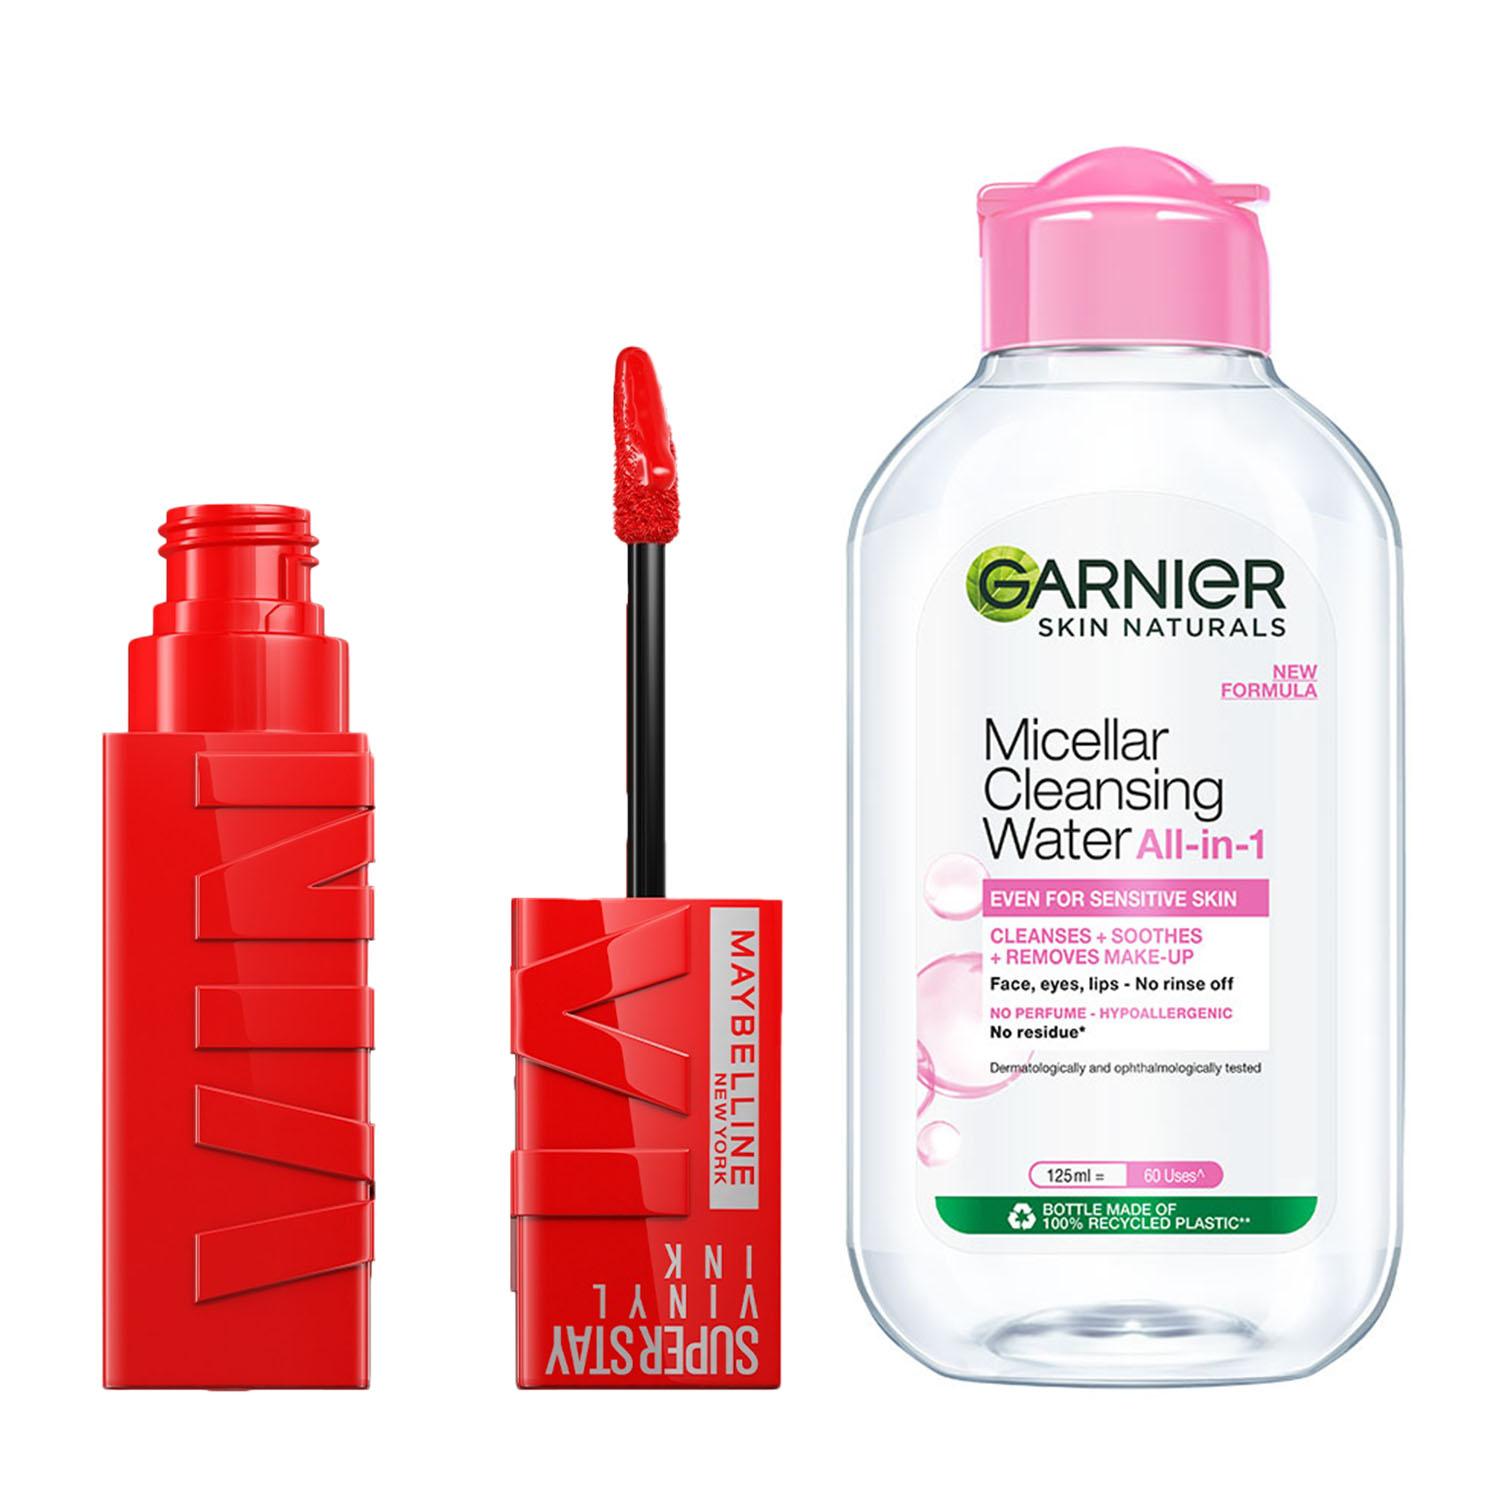 Maybelline Superstay Vinyl Ink Liquid Lipstick, Red Hot with Garnier Micellar Cleansing Water Combo